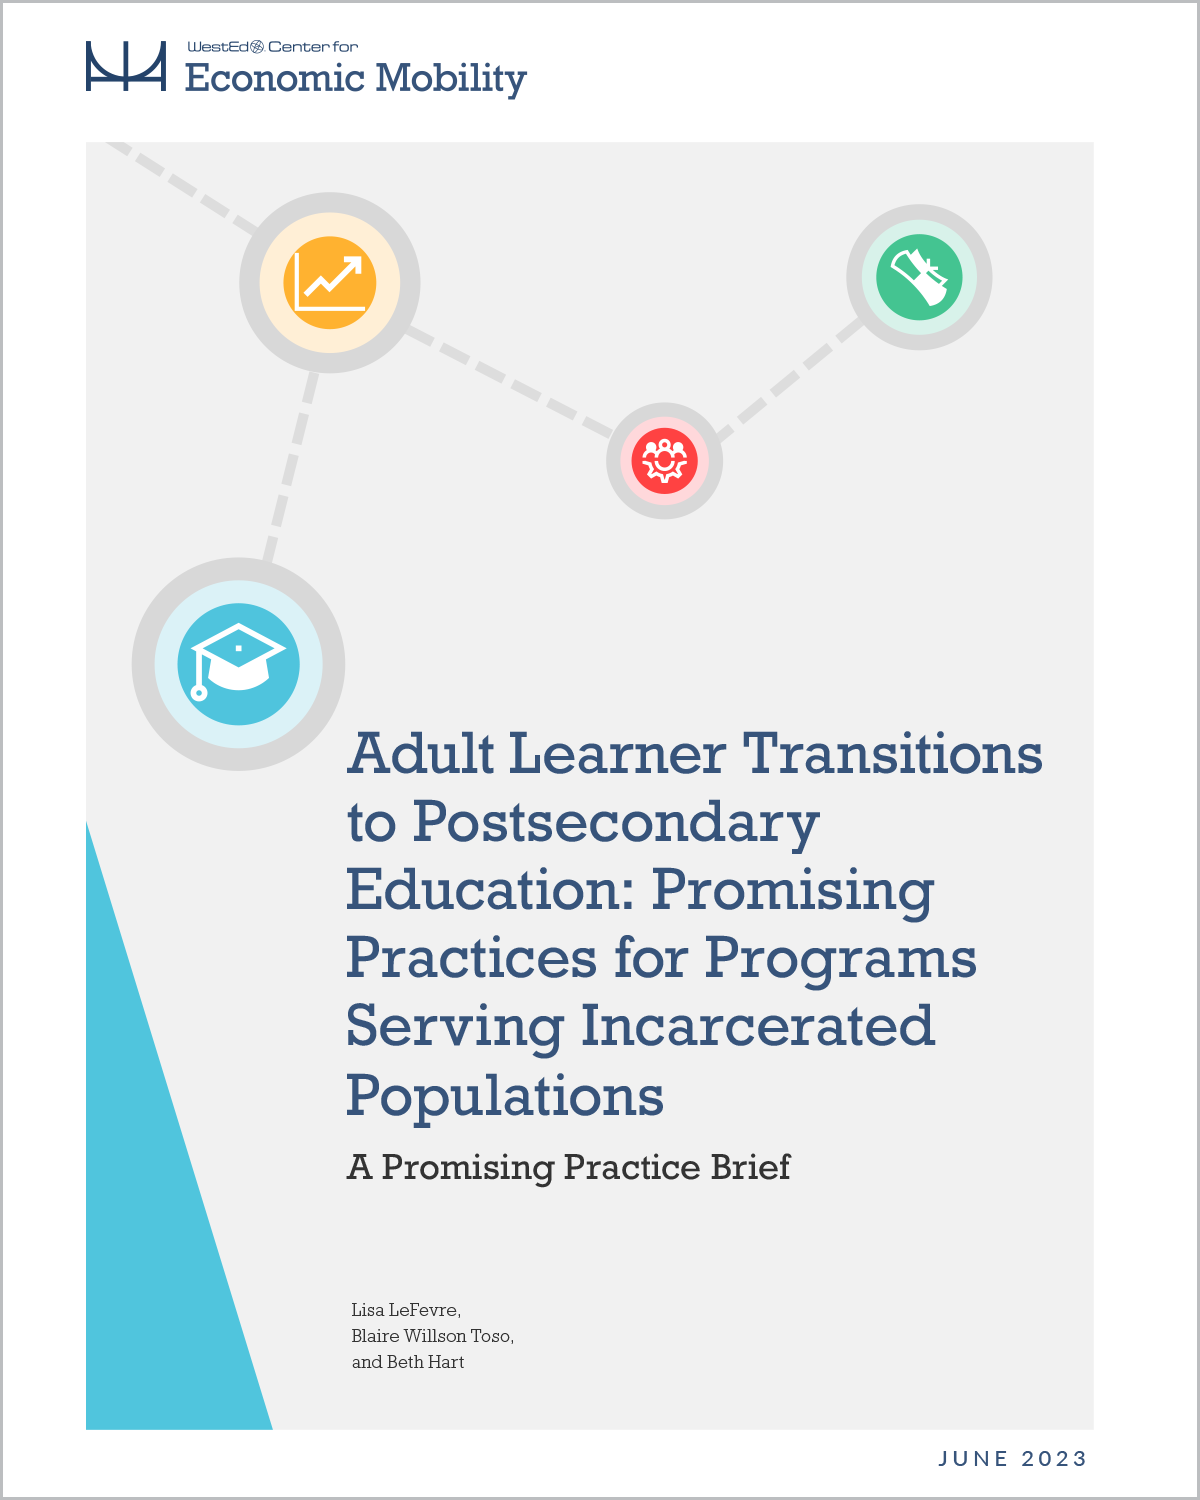 Adult Learner Transitions to Postsecondary Education: Promising Practices for Programs Servings Incarcerated Populations. A Promising Practice Brief.